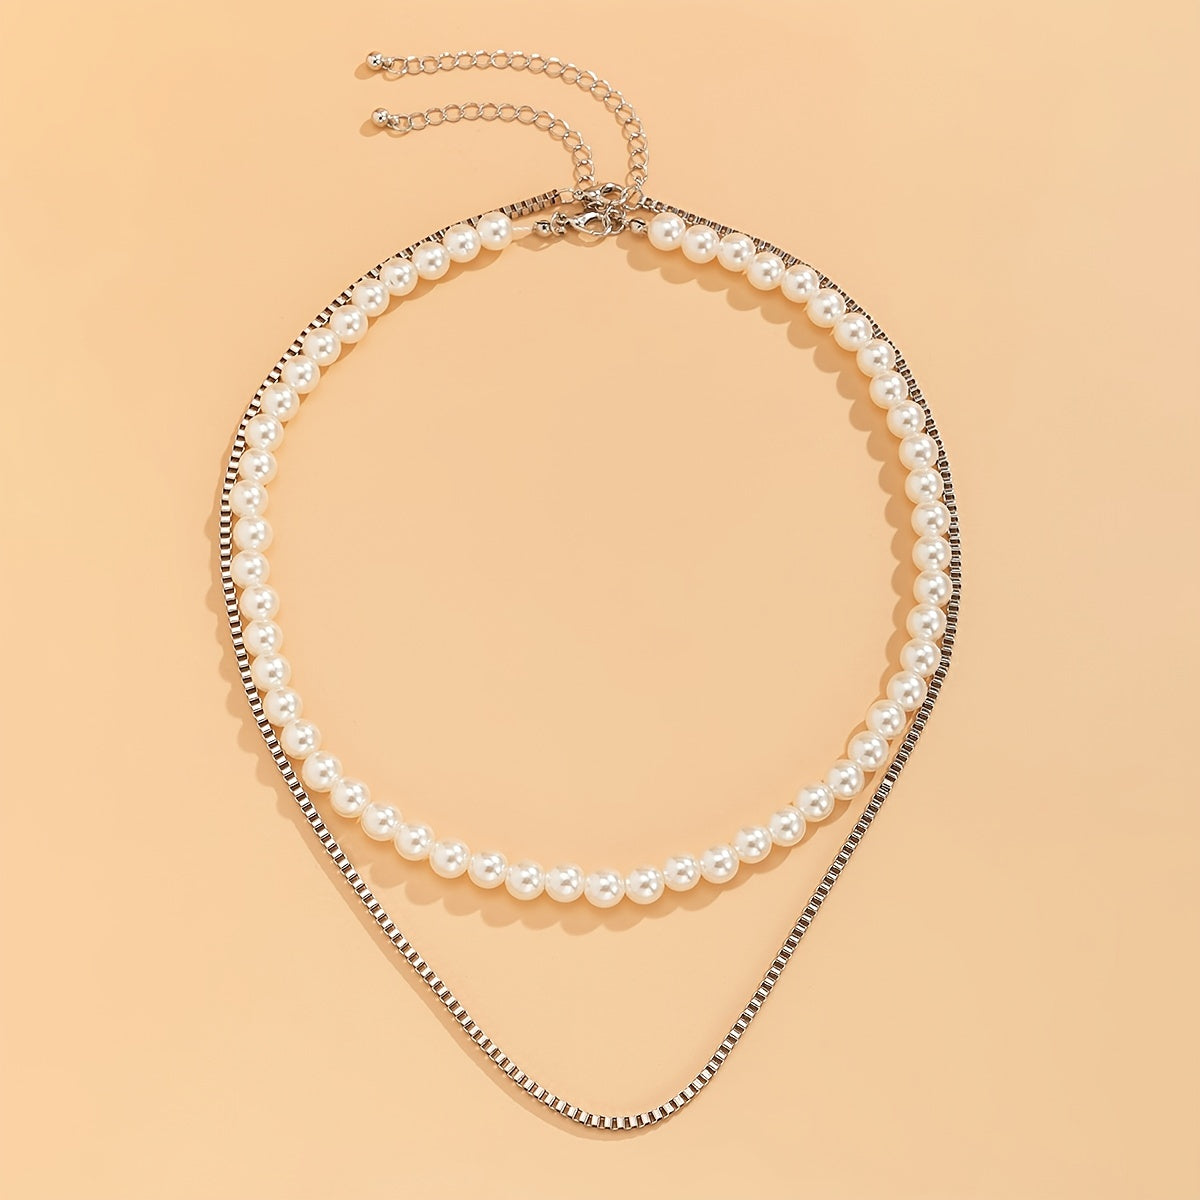 Get Trendy with our 2pcs/Set Hip Hop Geometric Box Chain Stacked Pearl Necklace Set